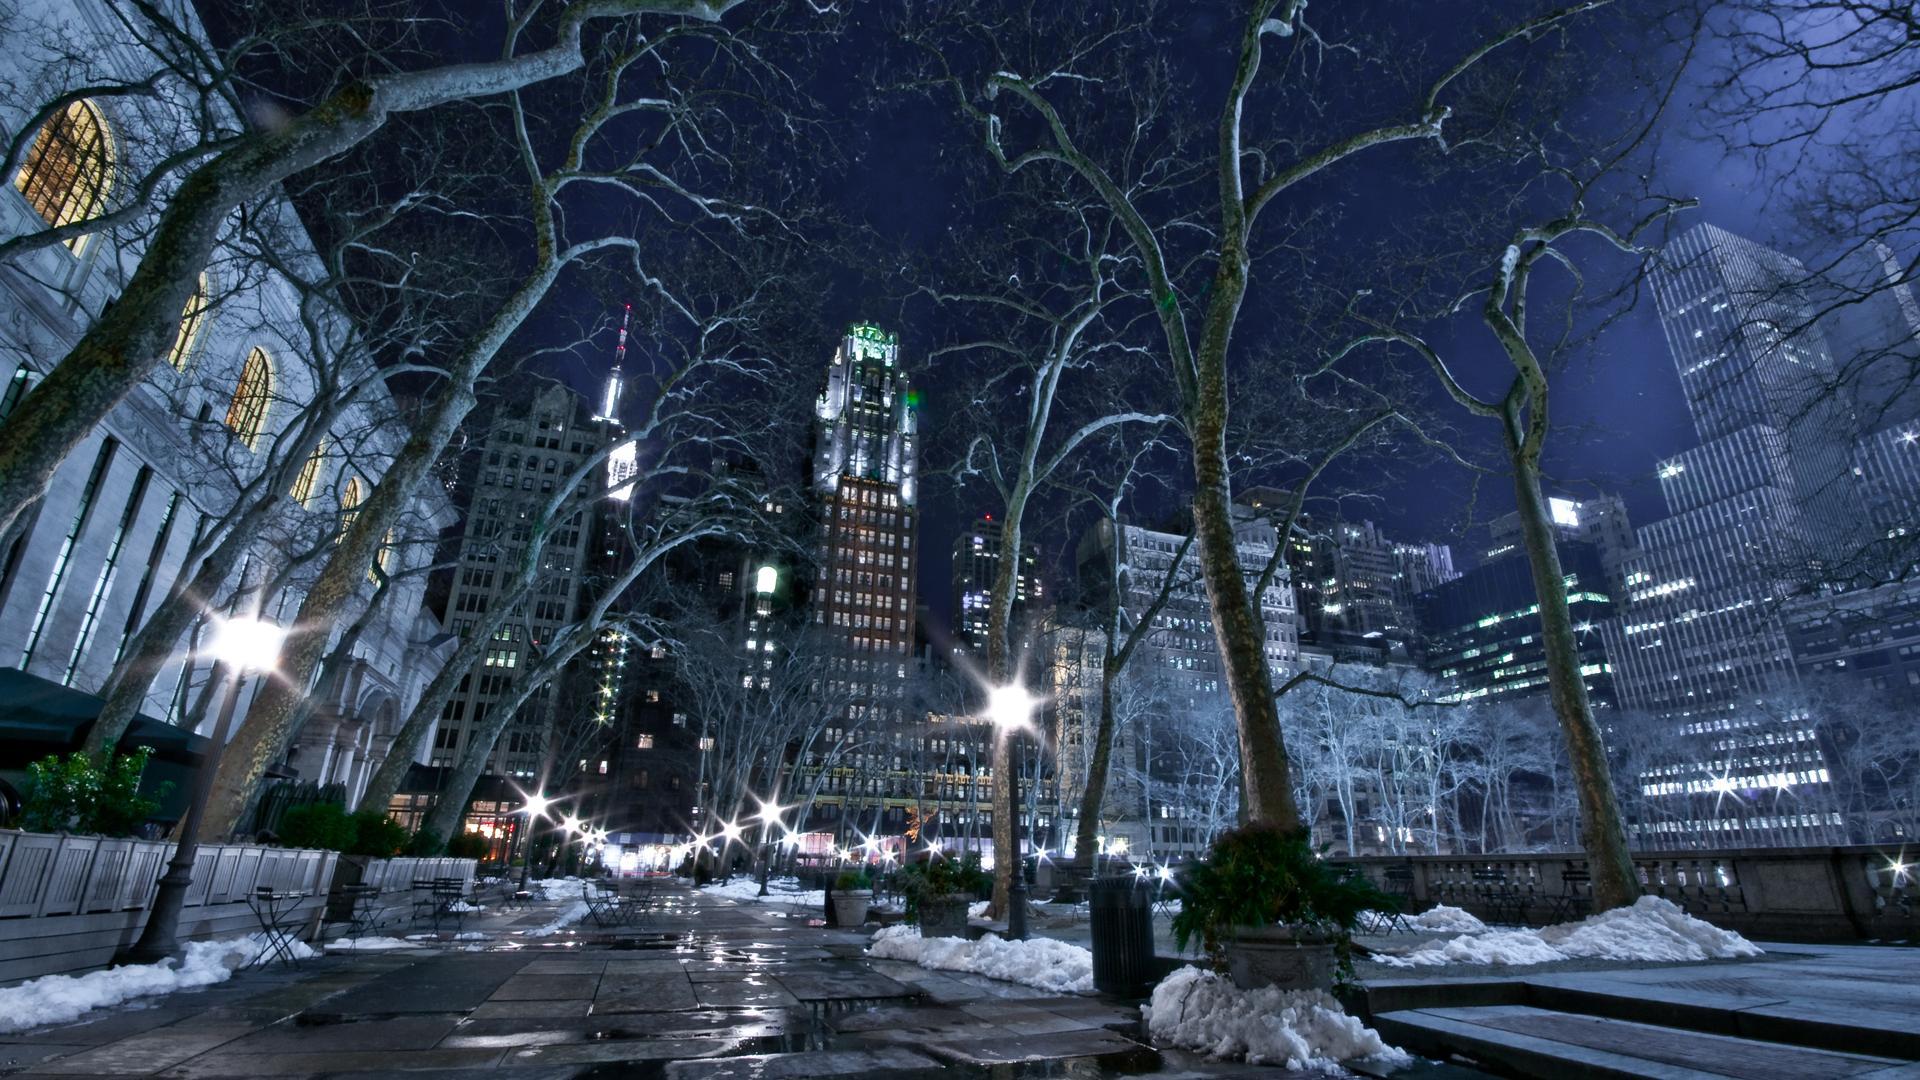 Download 1920x1080 New York City On A Winter Night wallpaper